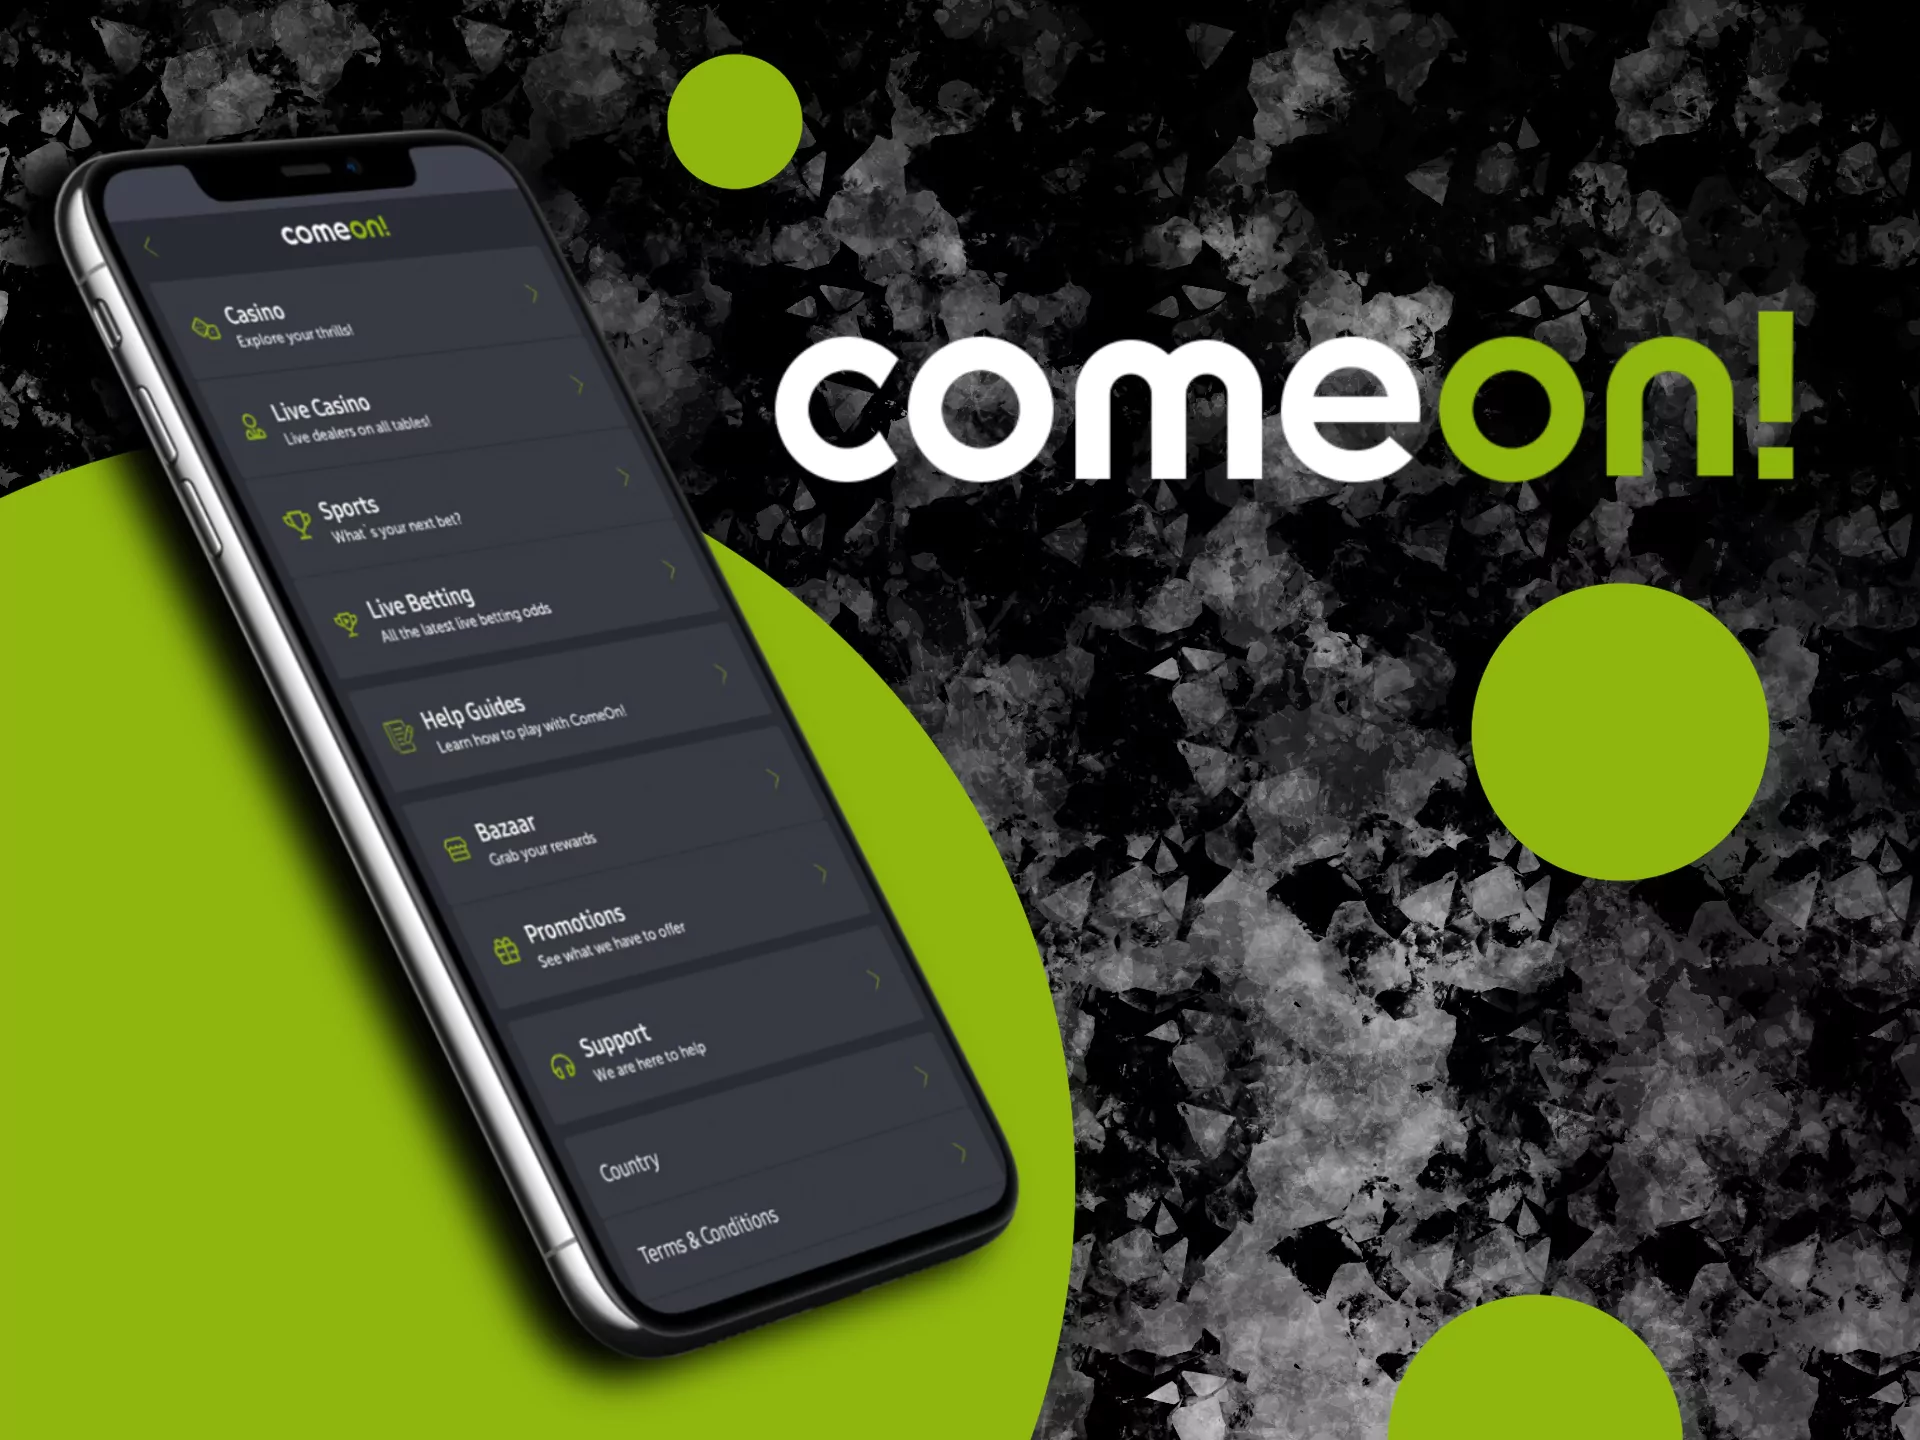 The Comeon app has a great design and user-friendly interface.